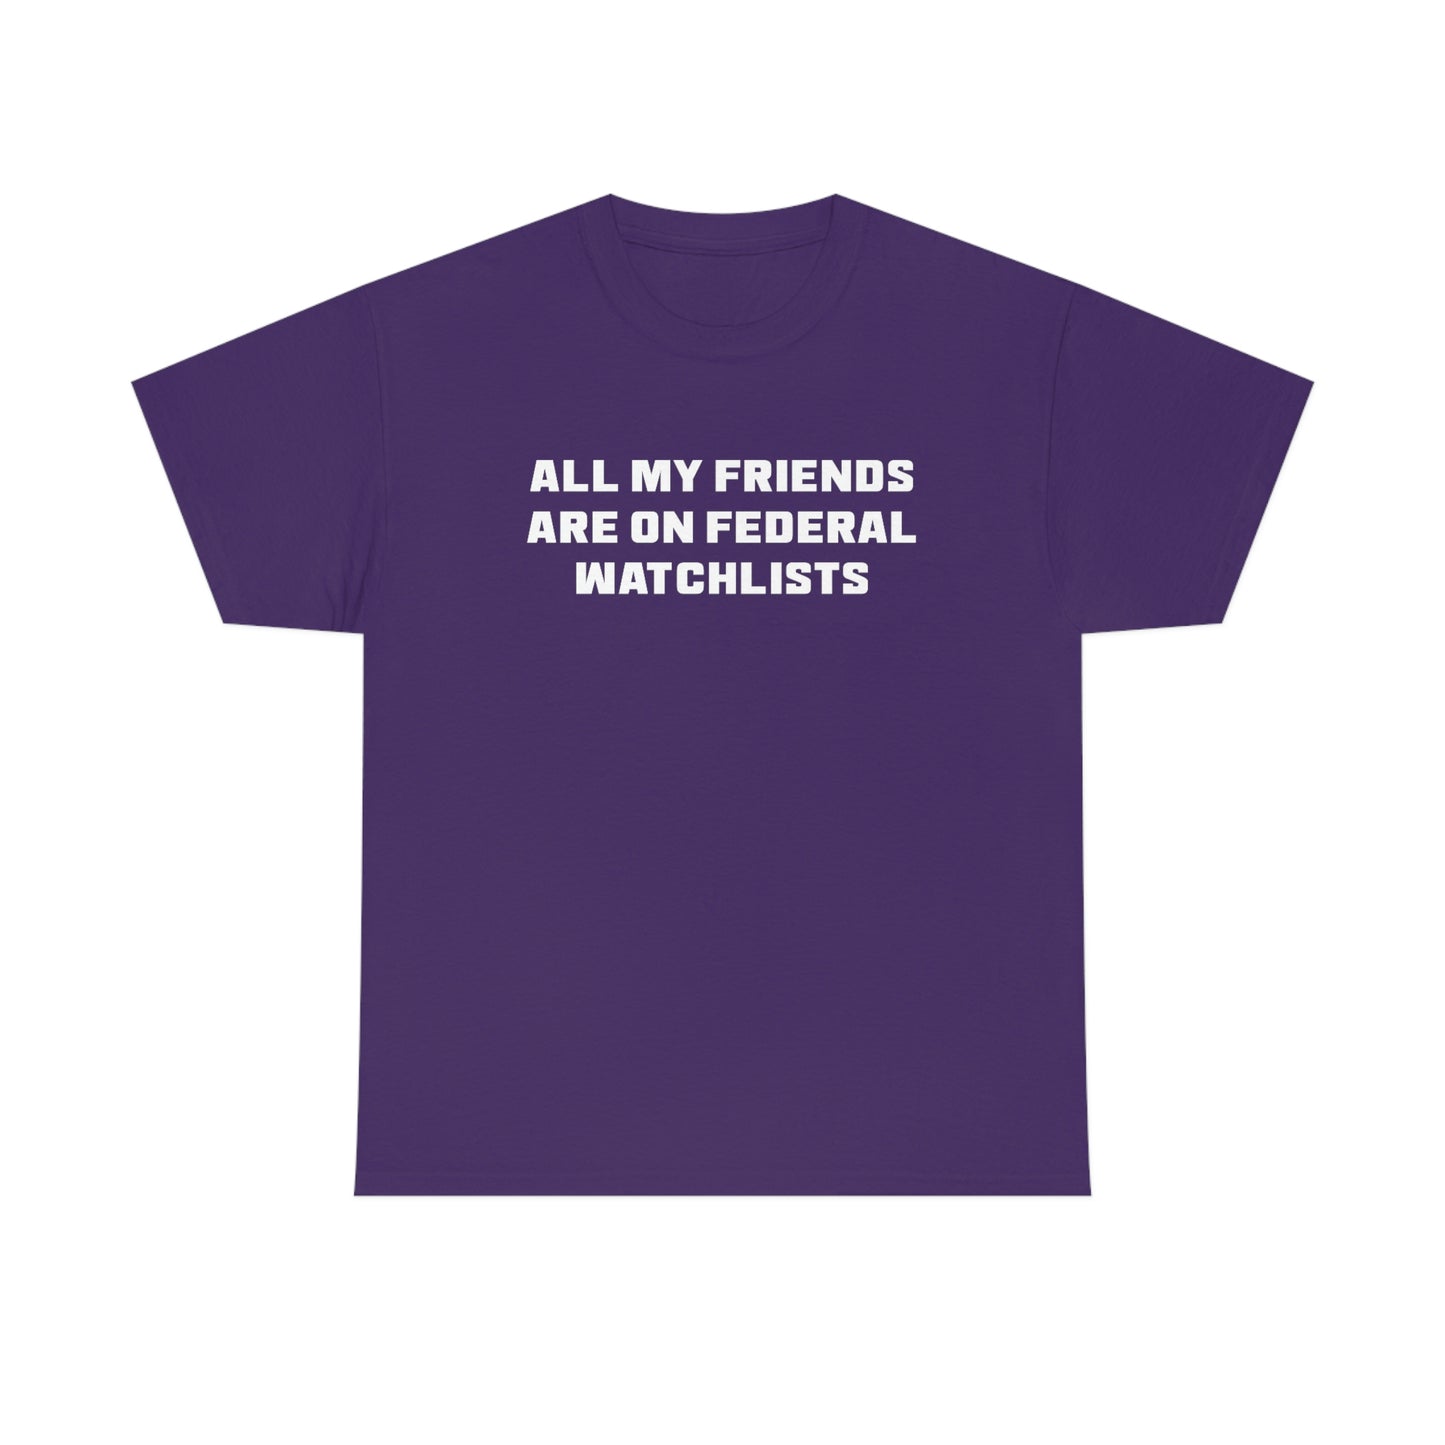 All My Friends Are on Federal Watchlists Tee